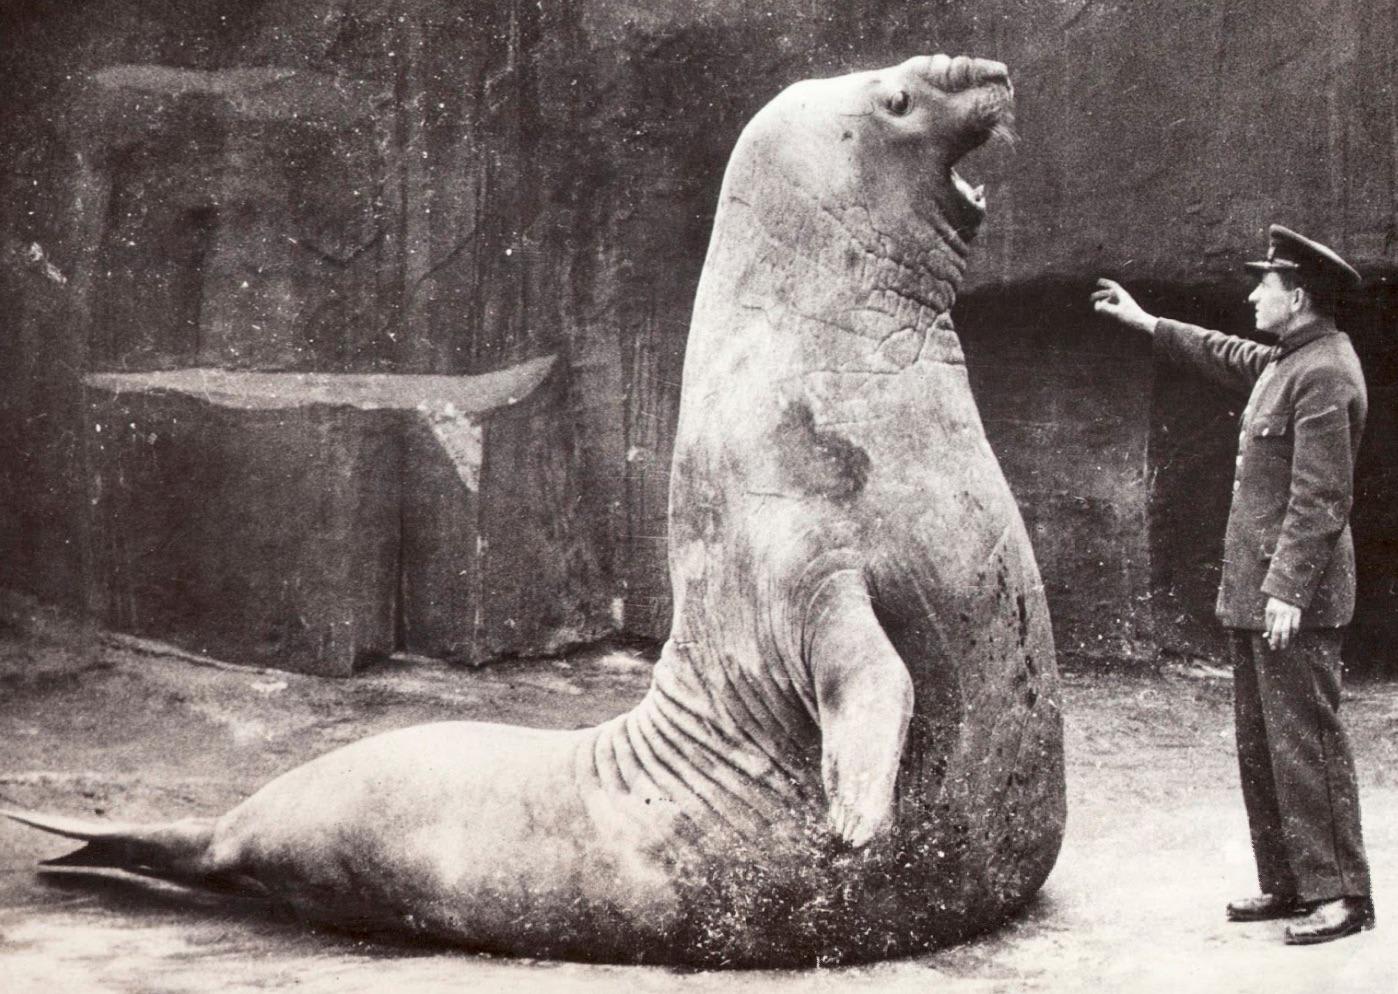 Roland, a gargantuan 4,000 pound male Elephant Seal that lived at the Berlin zoo, circa 1930’s